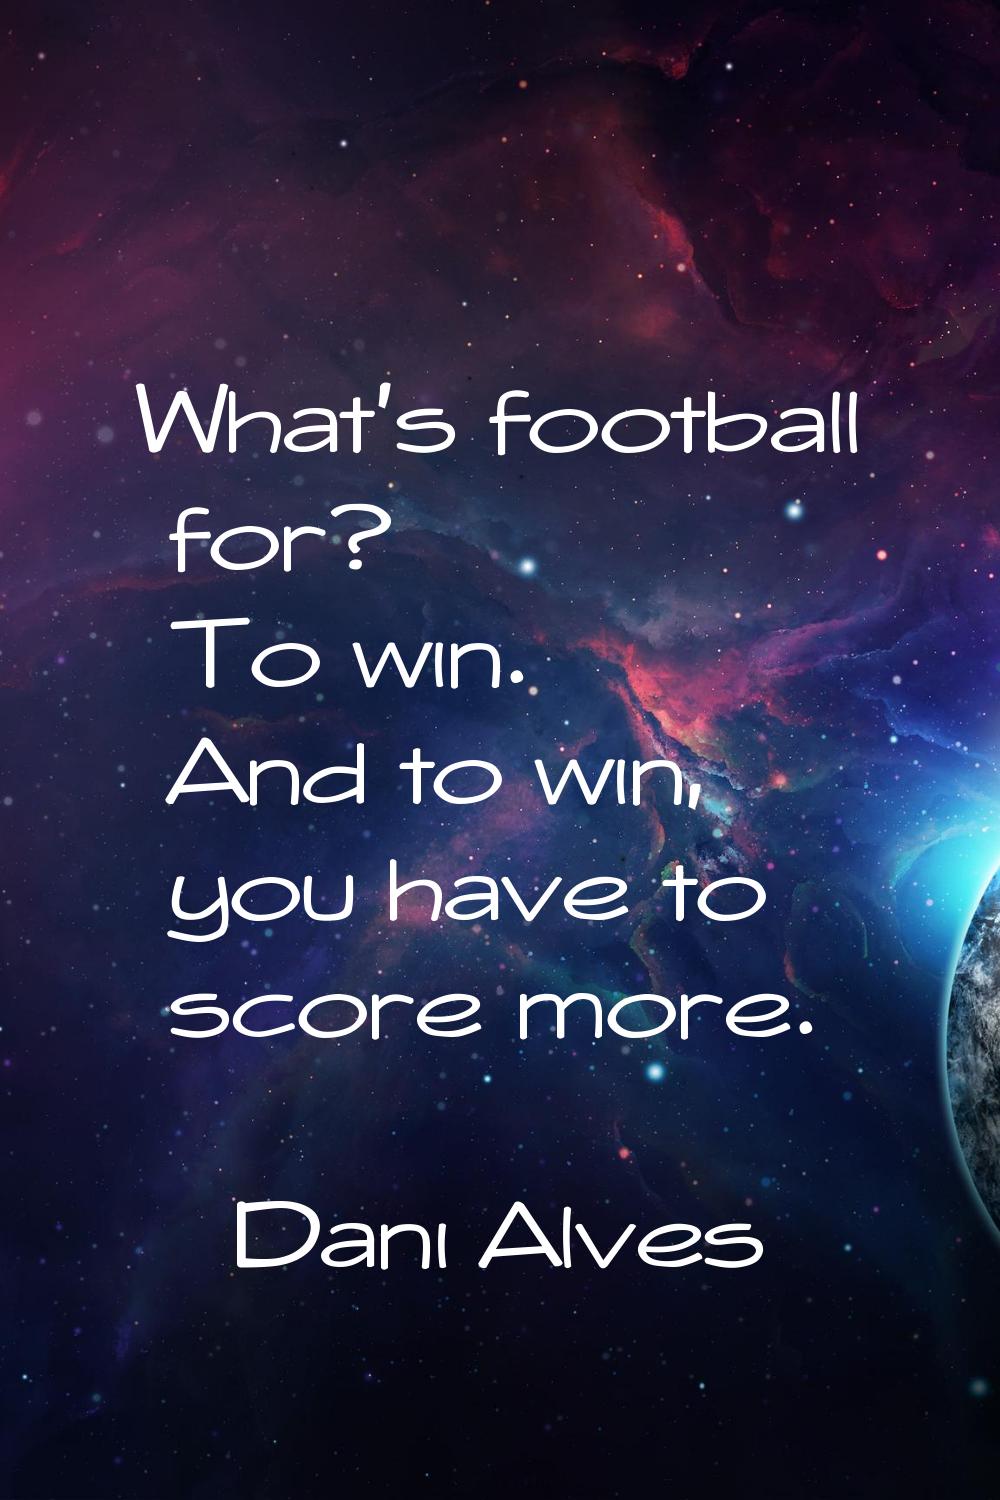 What's football for? To win. And to win, you have to score more.